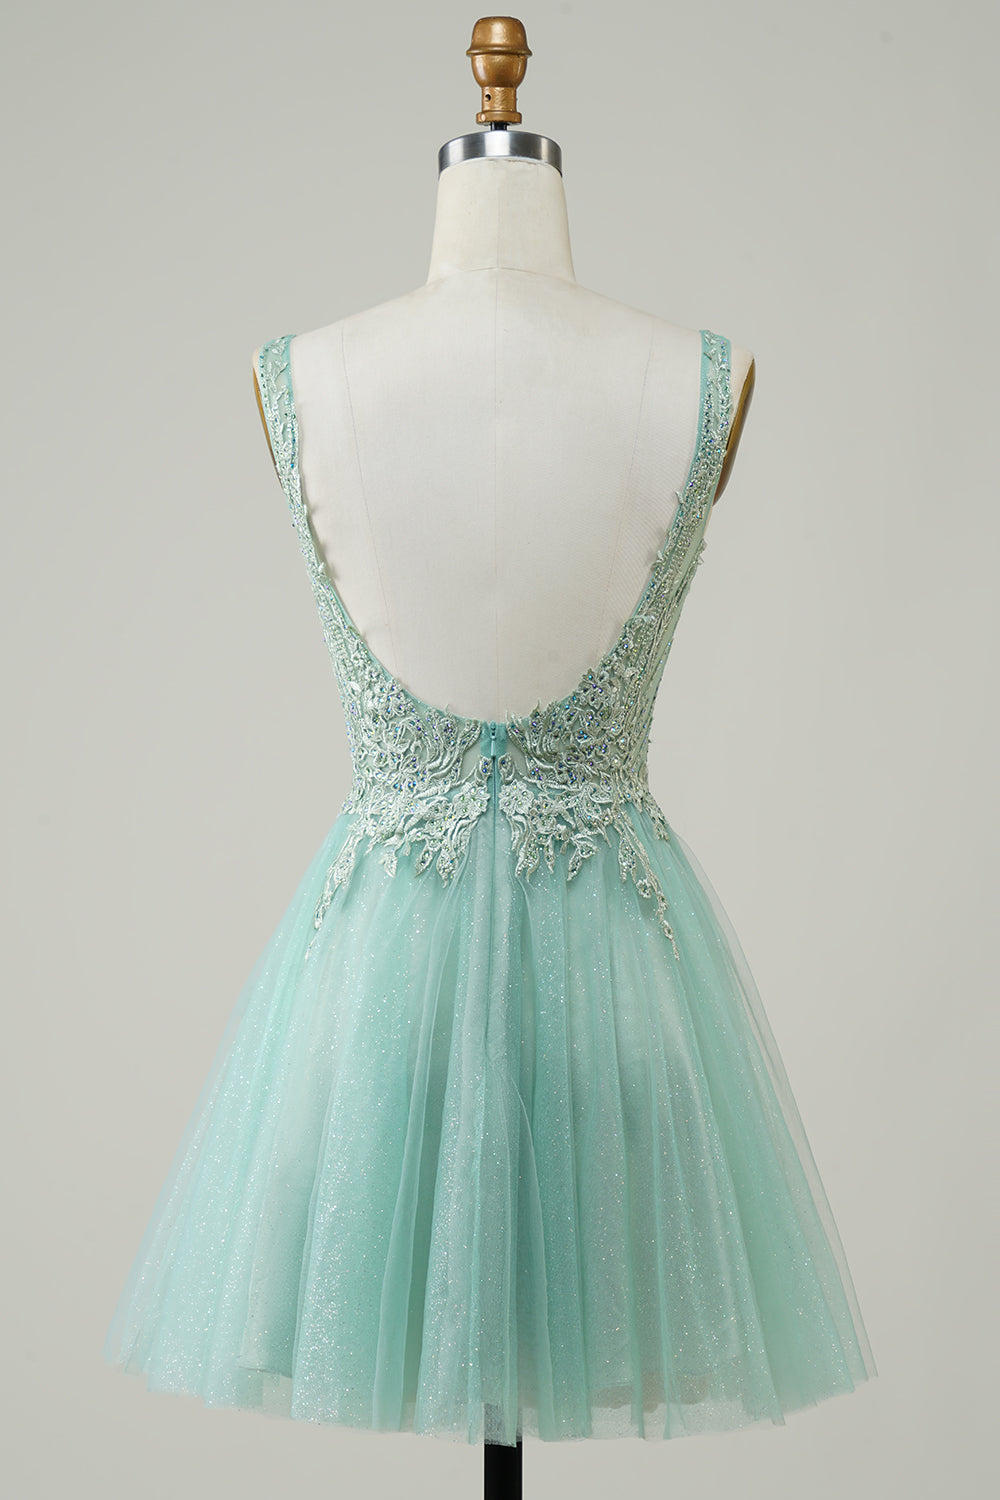 A Line Cute Green Homecoming Dress with Appliques